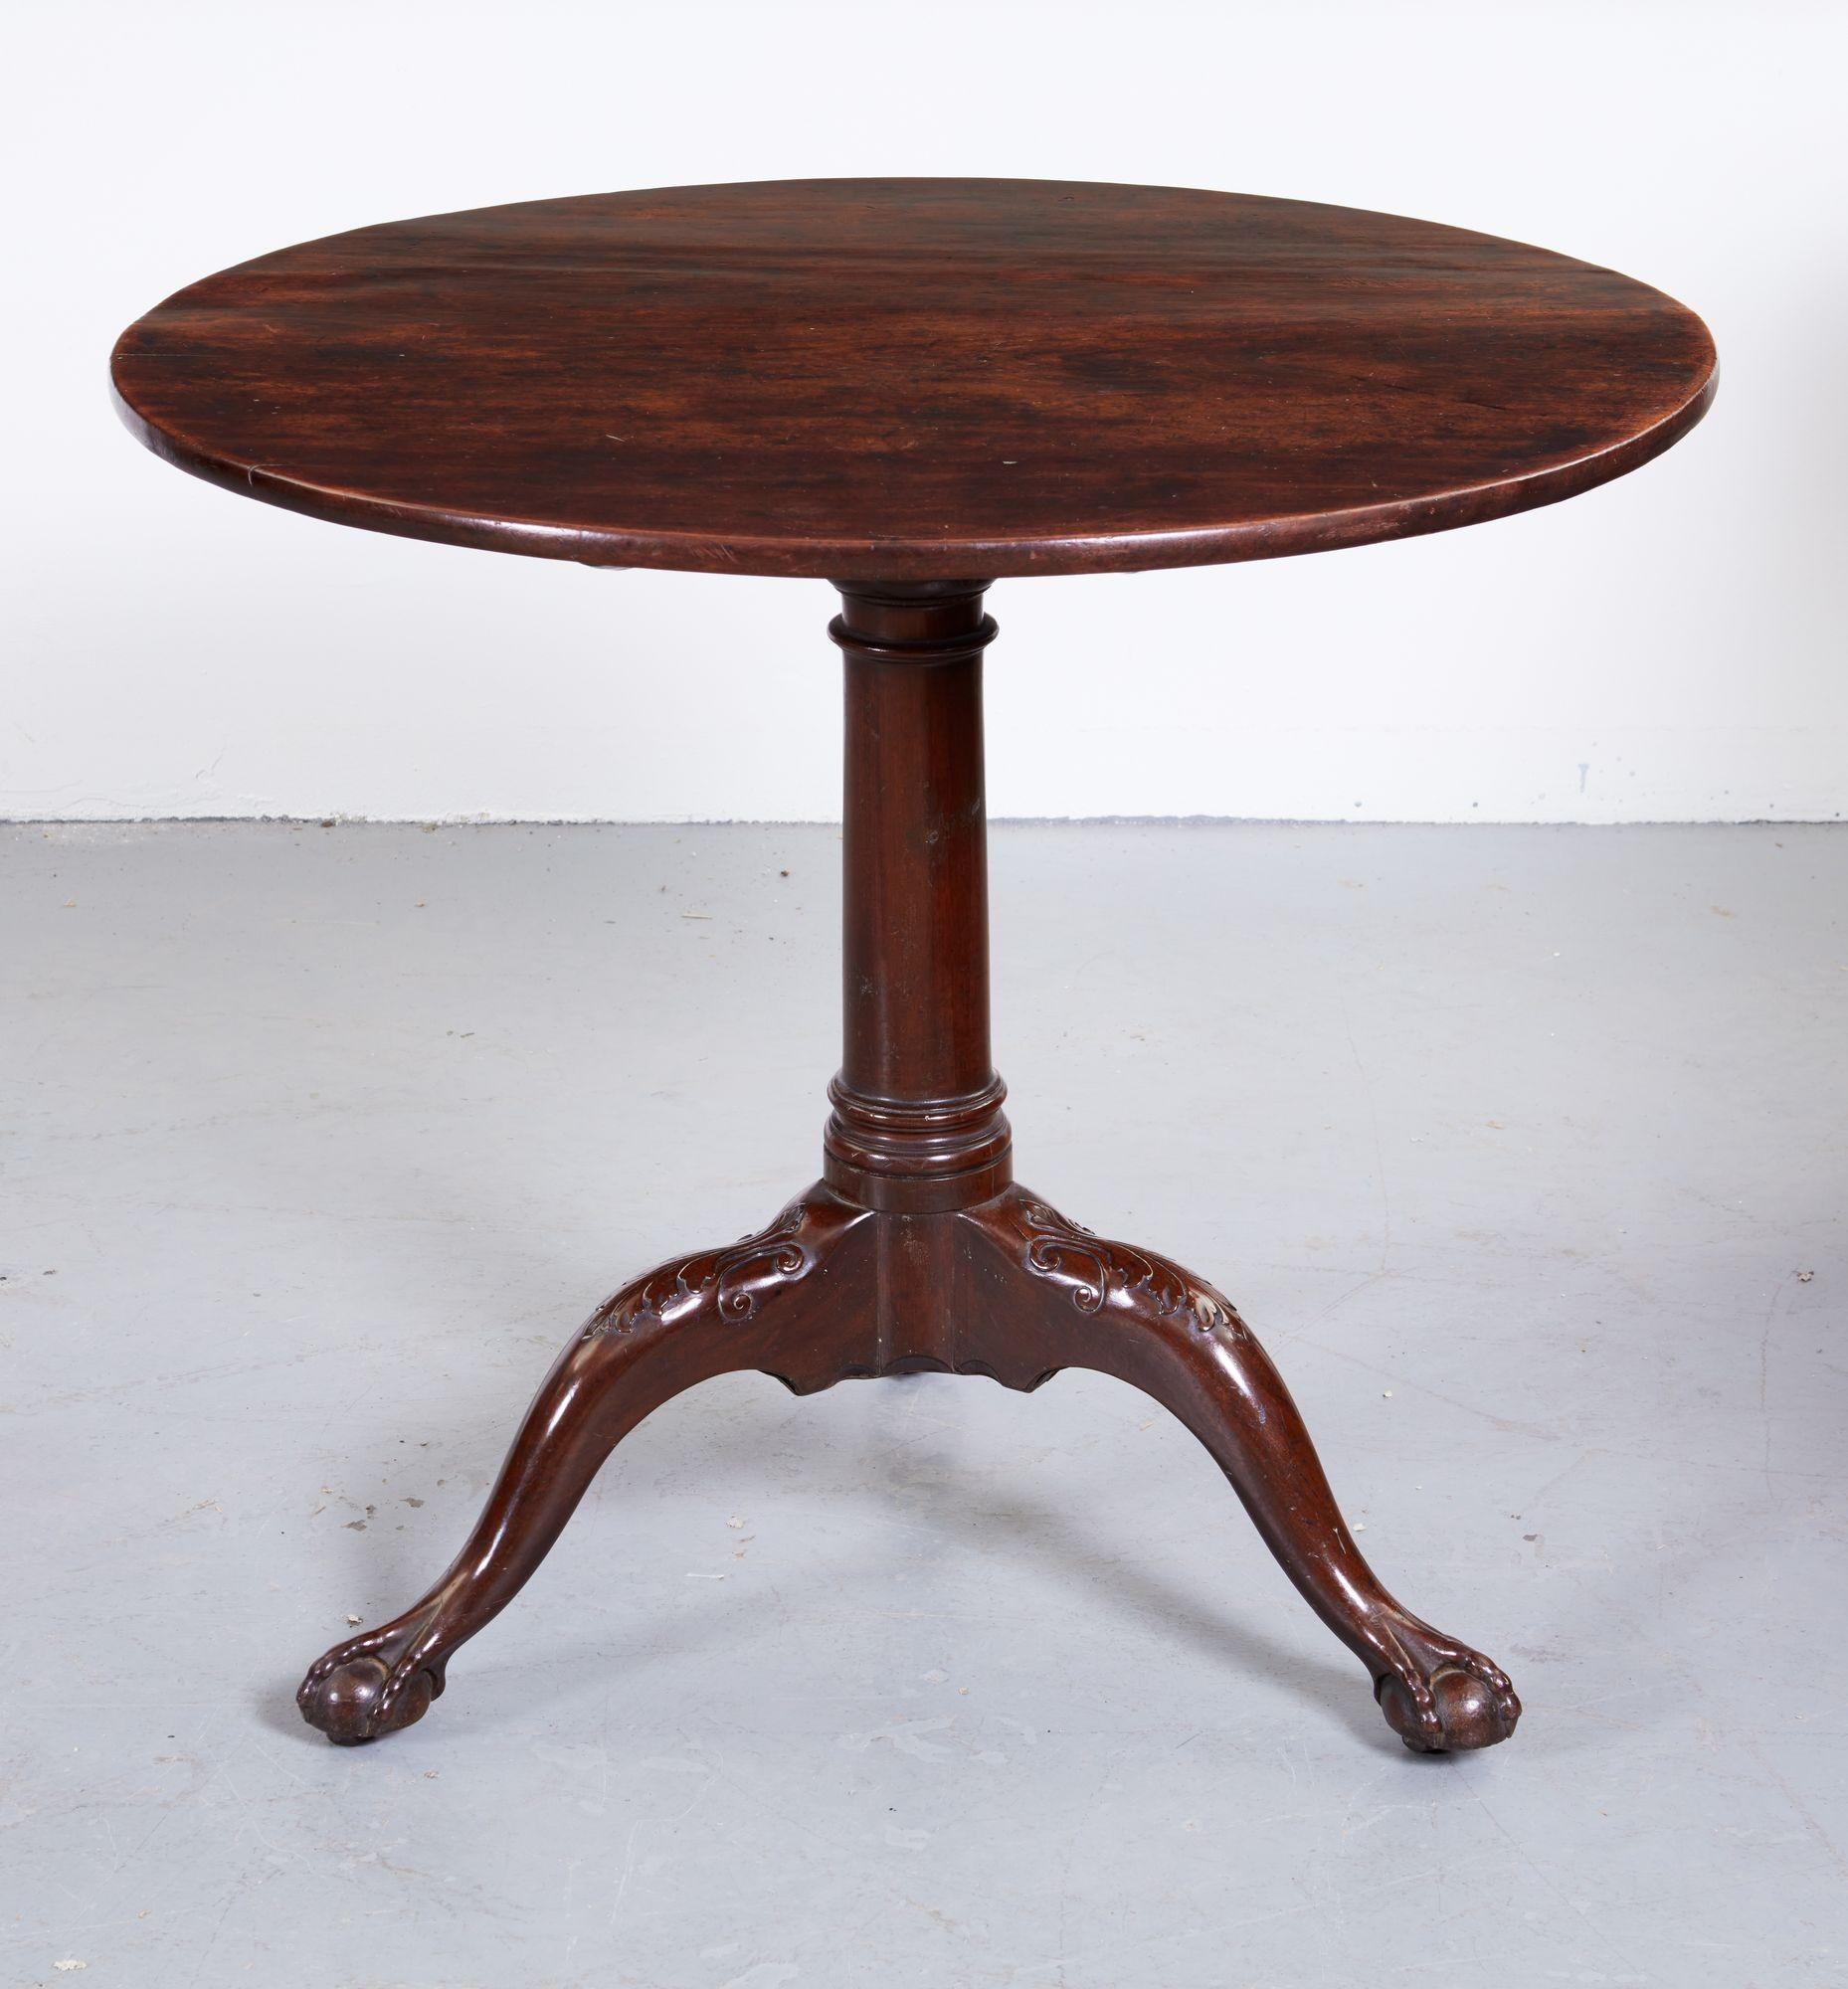 Good 18th century Cuban mahogany tilt-top tea table, the single plank top with rich graining, over cannon barrel turned shaft, over acanthus leaf carved cabriole legs ending in ball and claw feet, the whole with good rich color and patination.